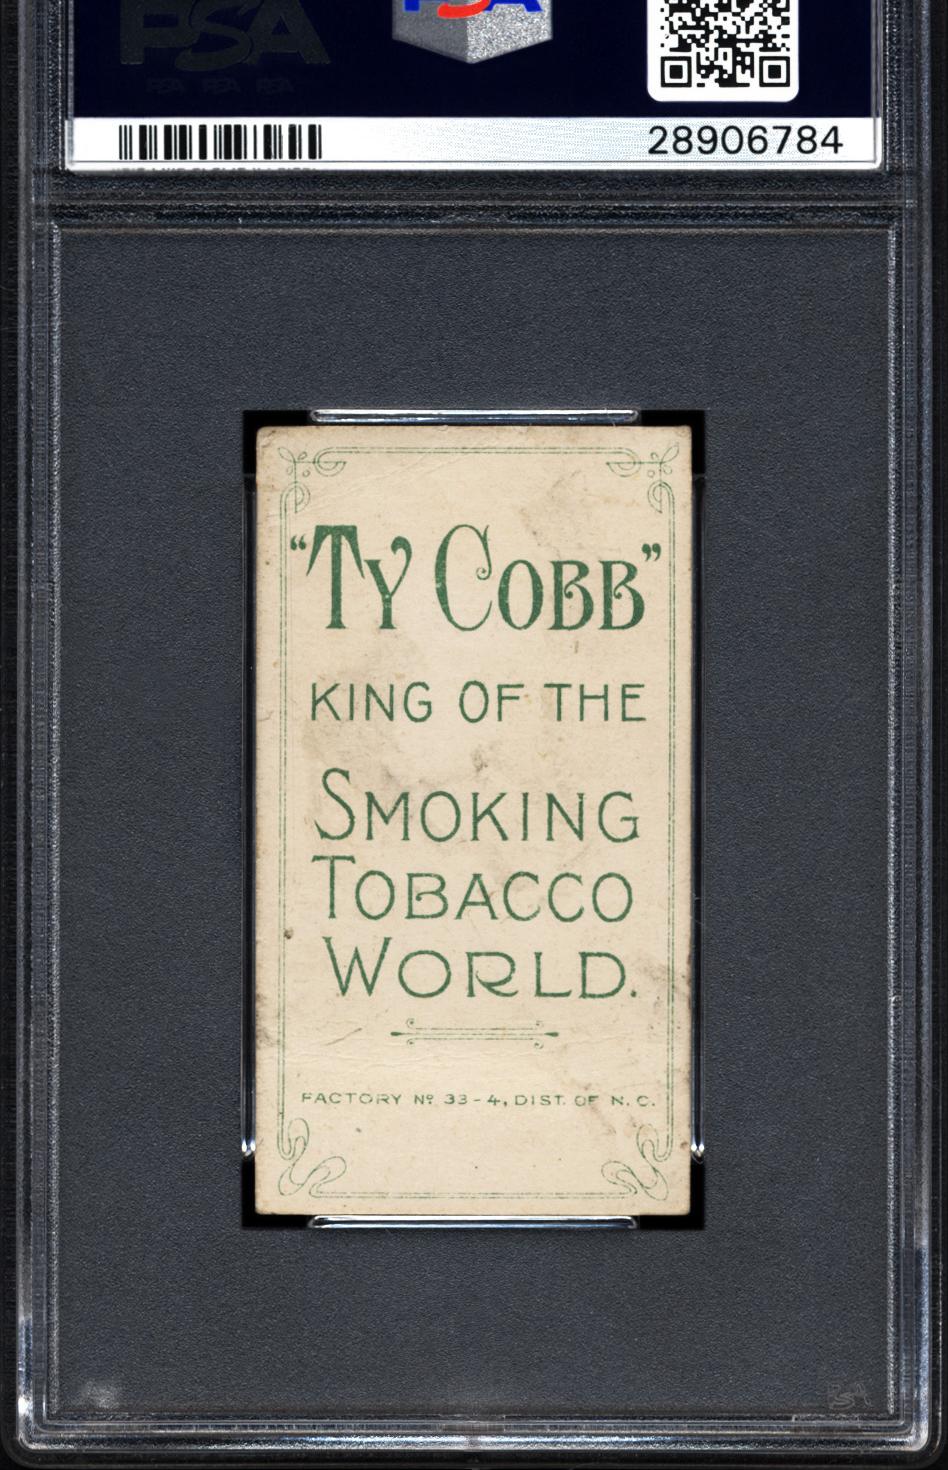 This Rare Ty Cobb Baseball Card Was Found in a Paper Bag 